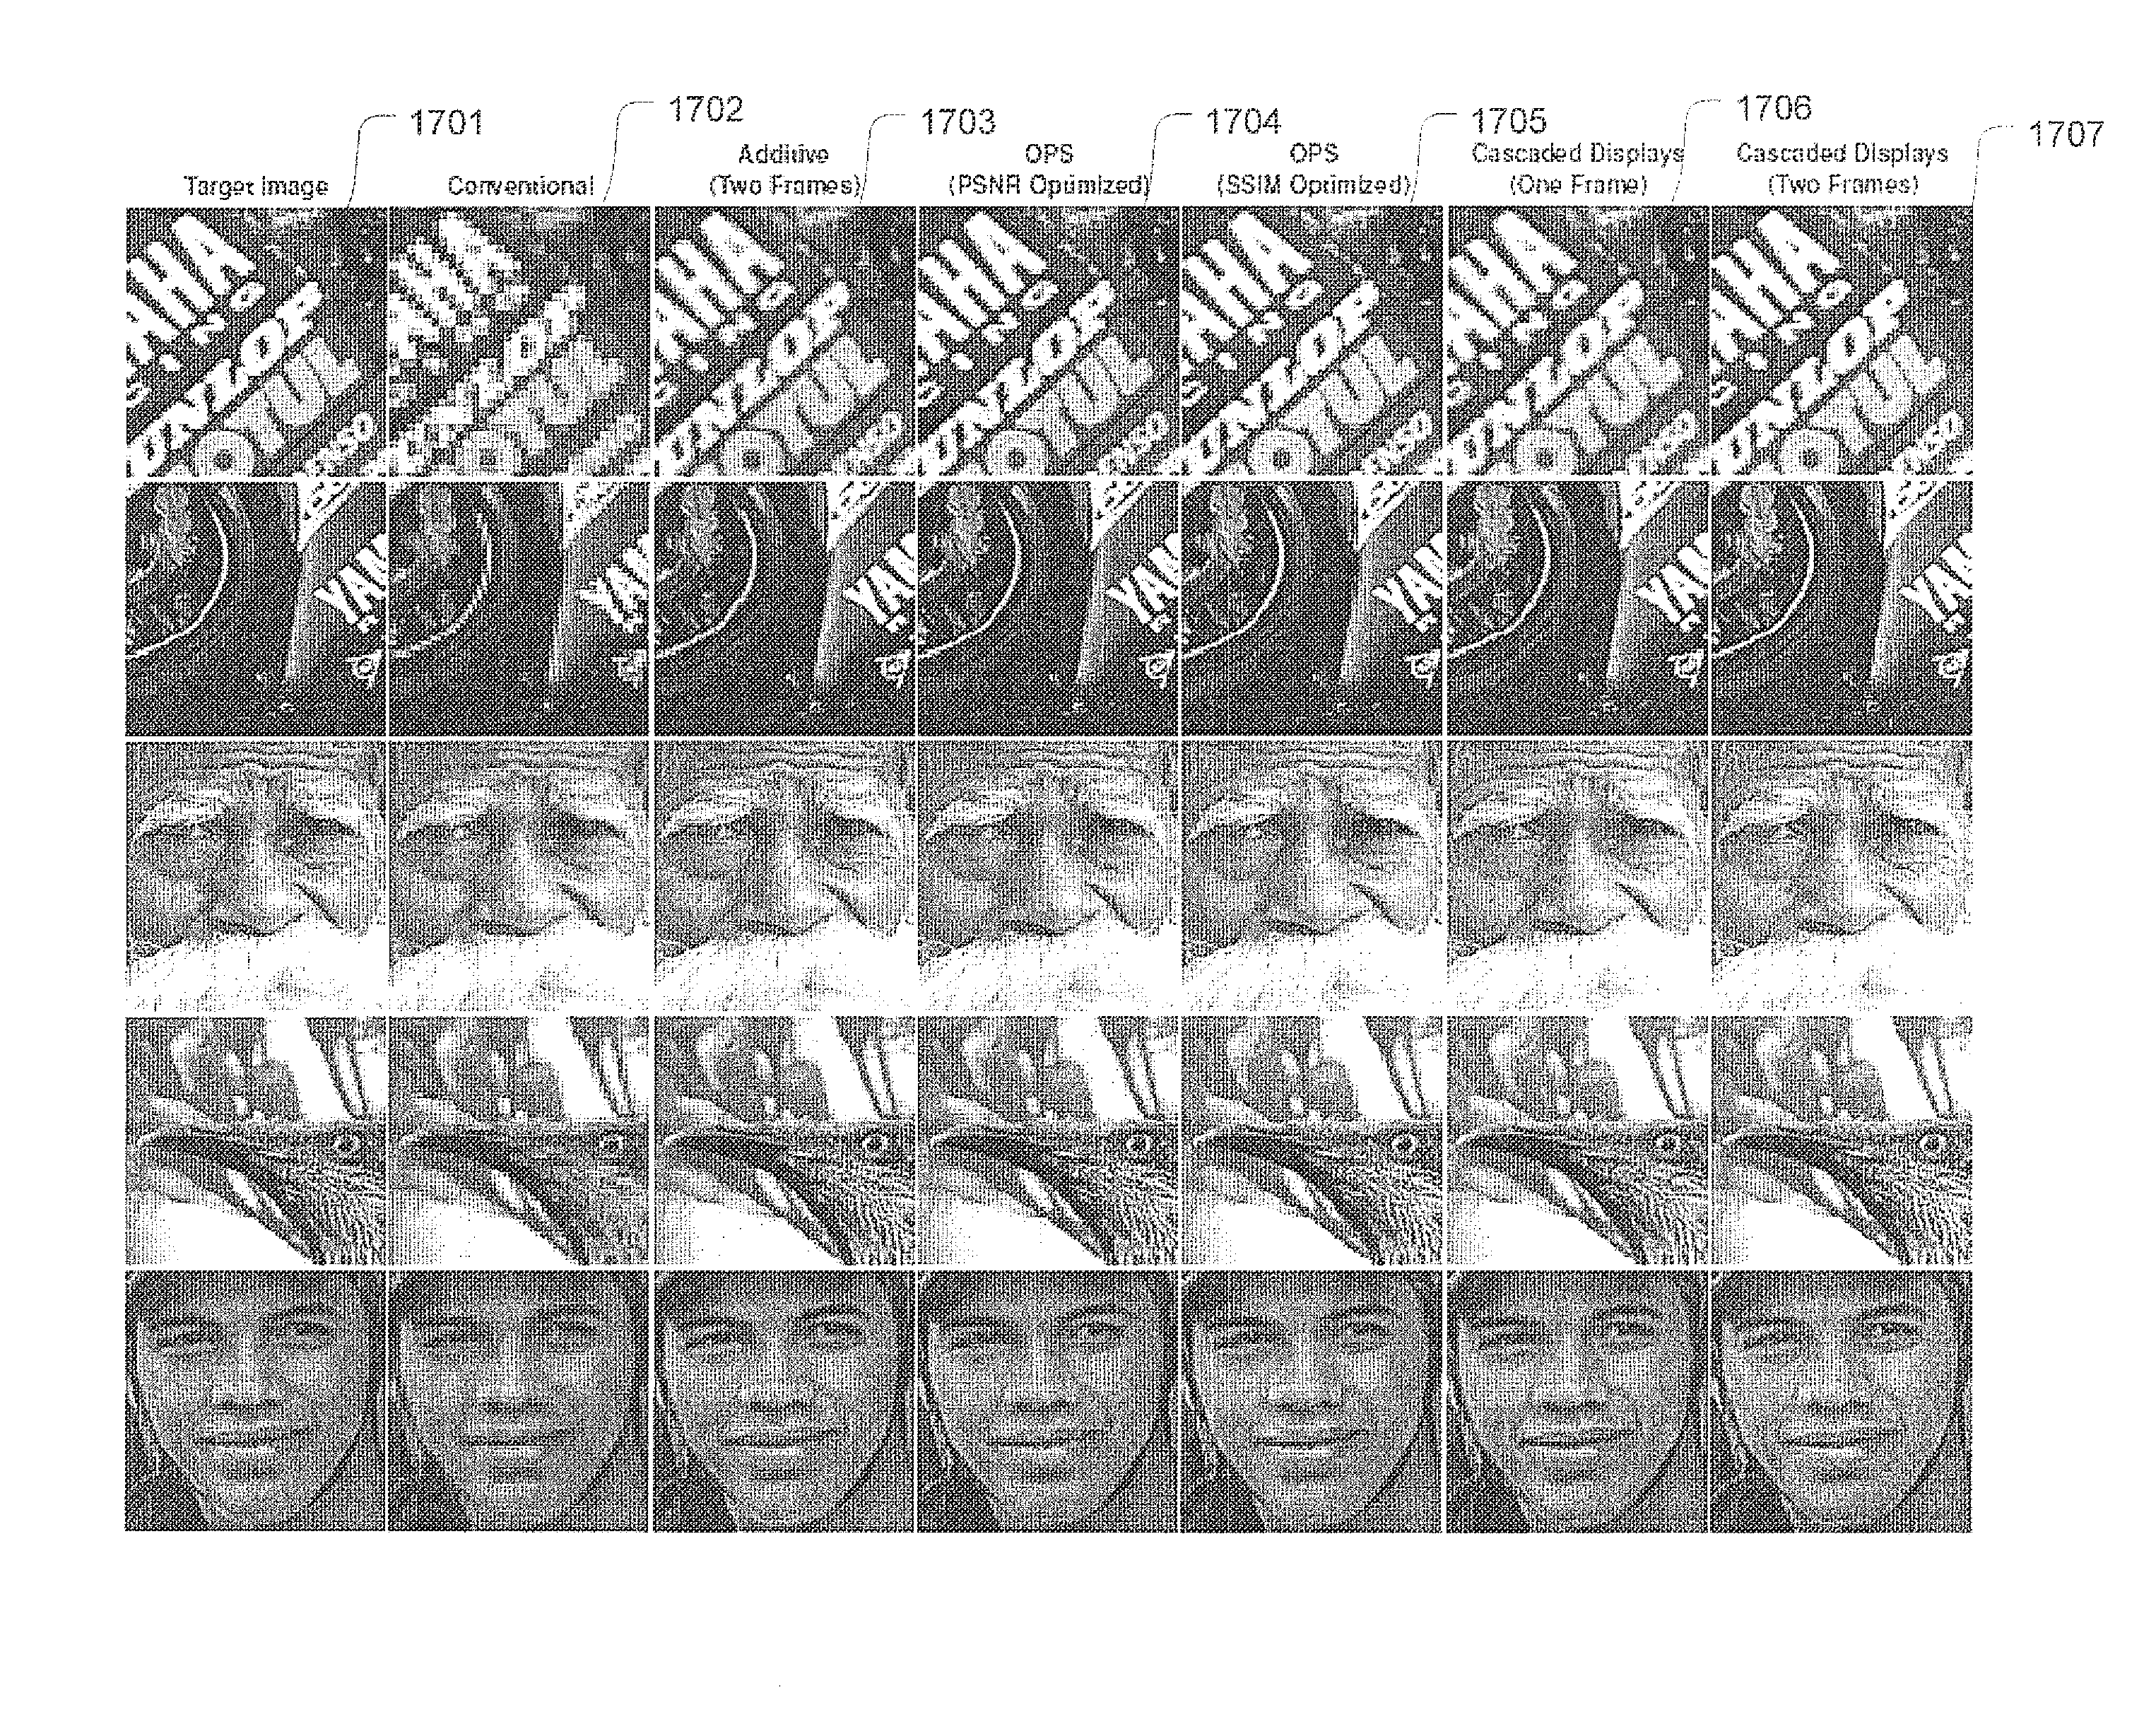 Superresolution display using cascaded panels